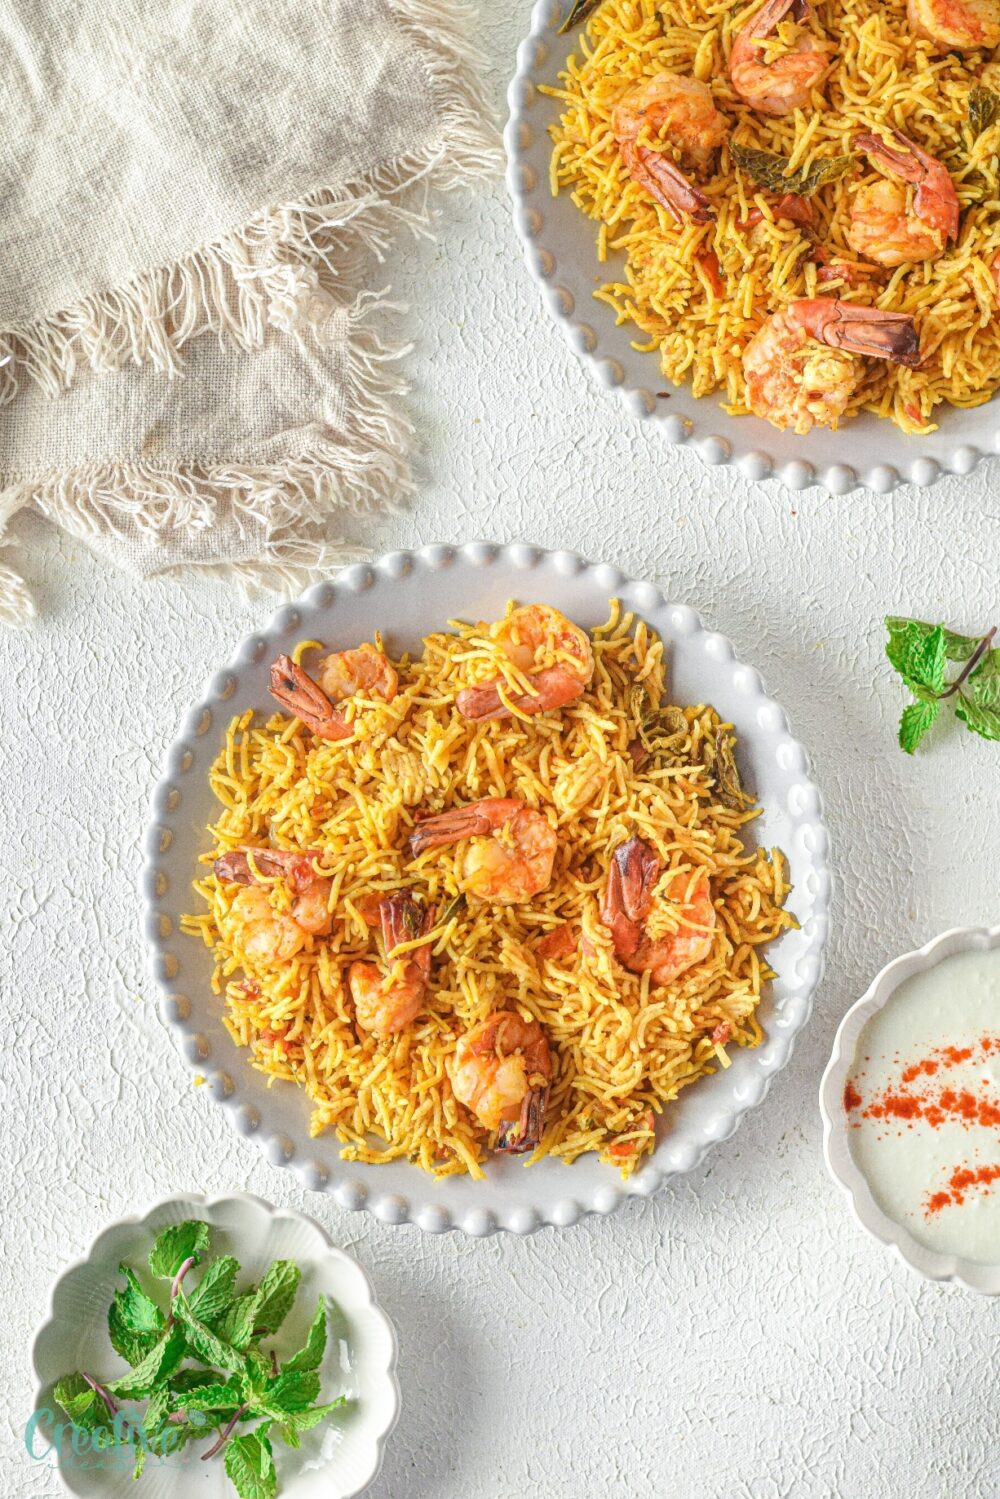 Discover a delectable shrimp biryani recipe made effortlessly in an instant pot. Savor the aromatic flavors and succulent shrimp!